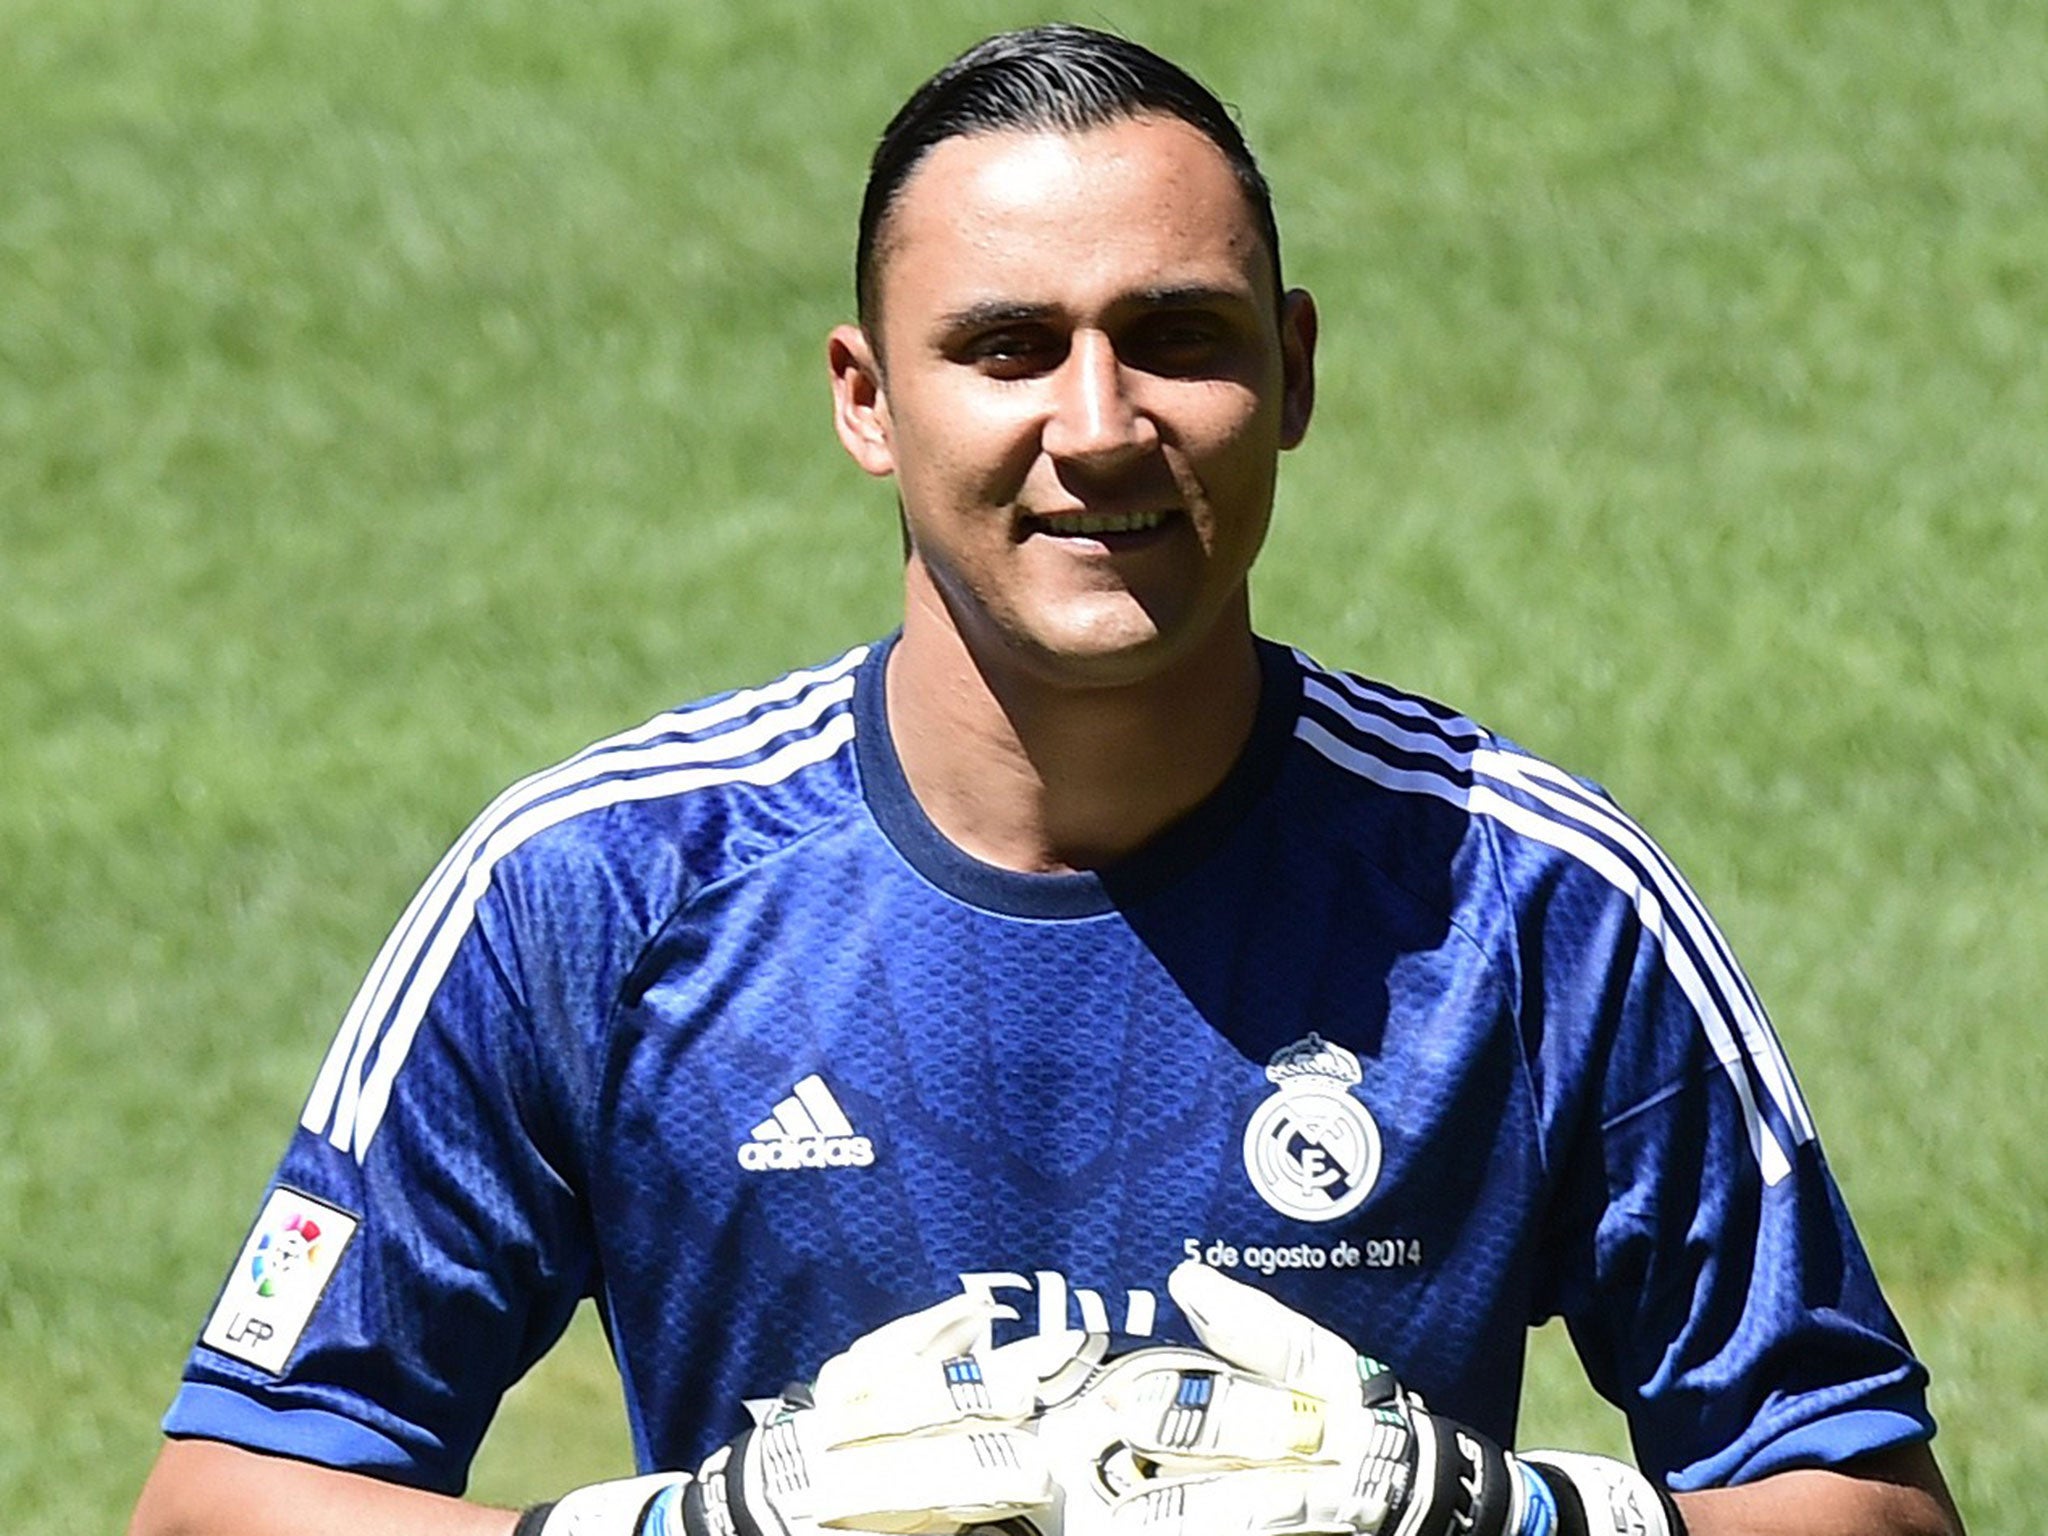 Keylor Navas was unveiled at Real Madrid today